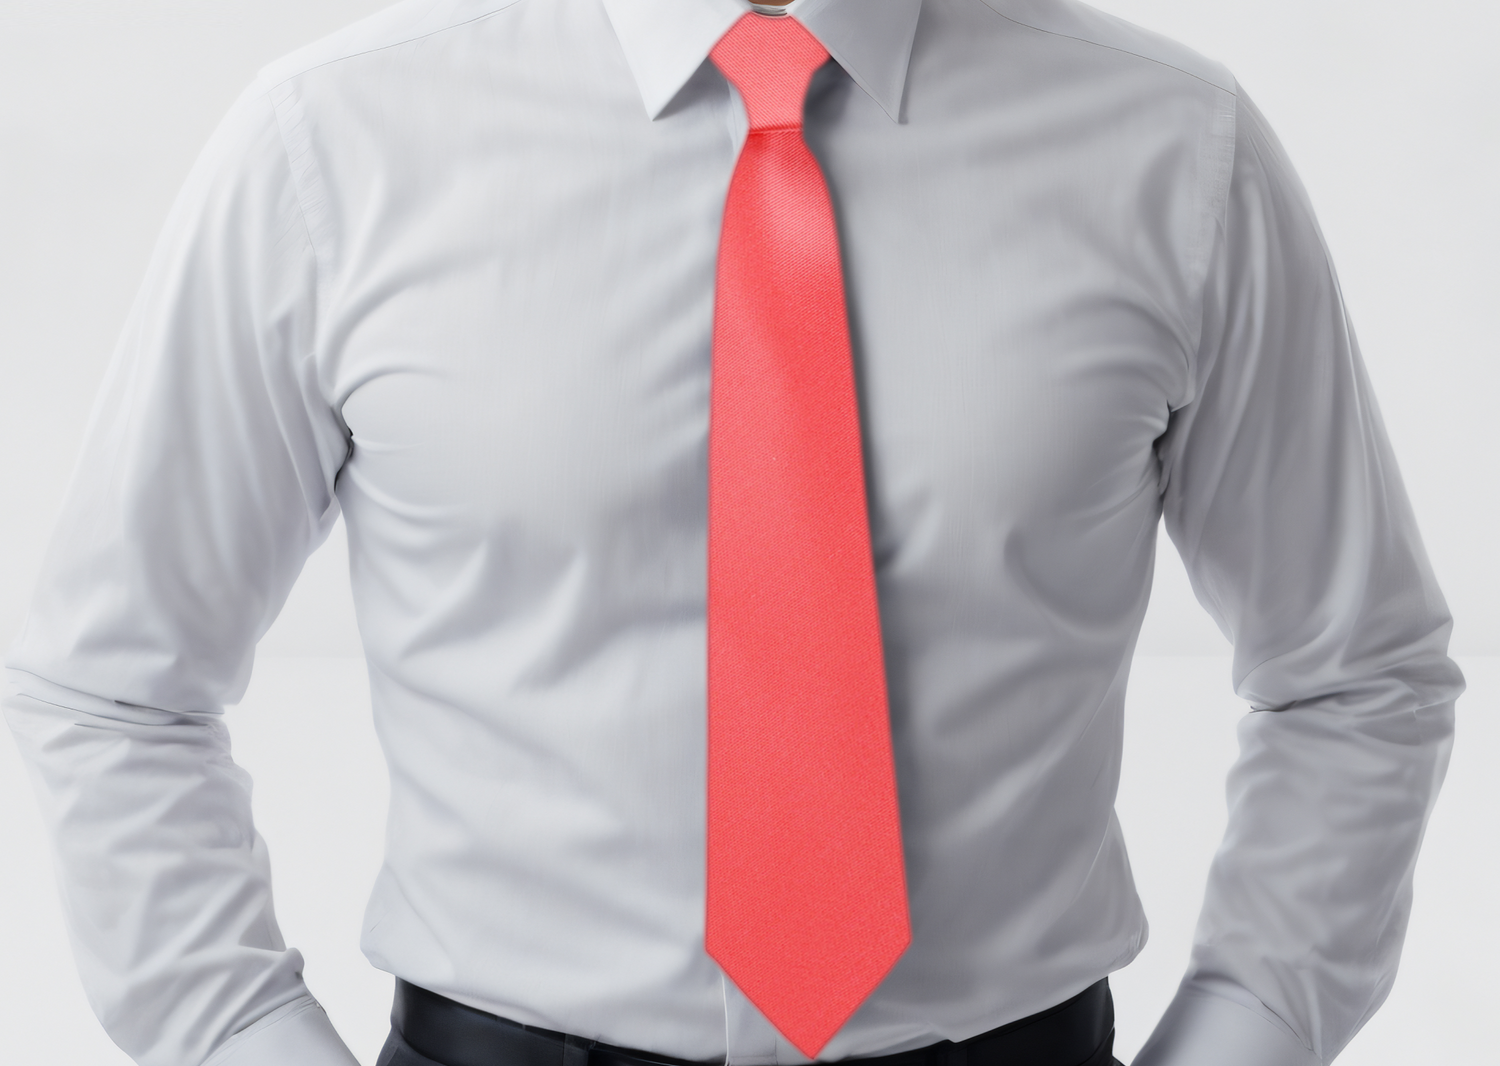 Coral Tie on White Shirt